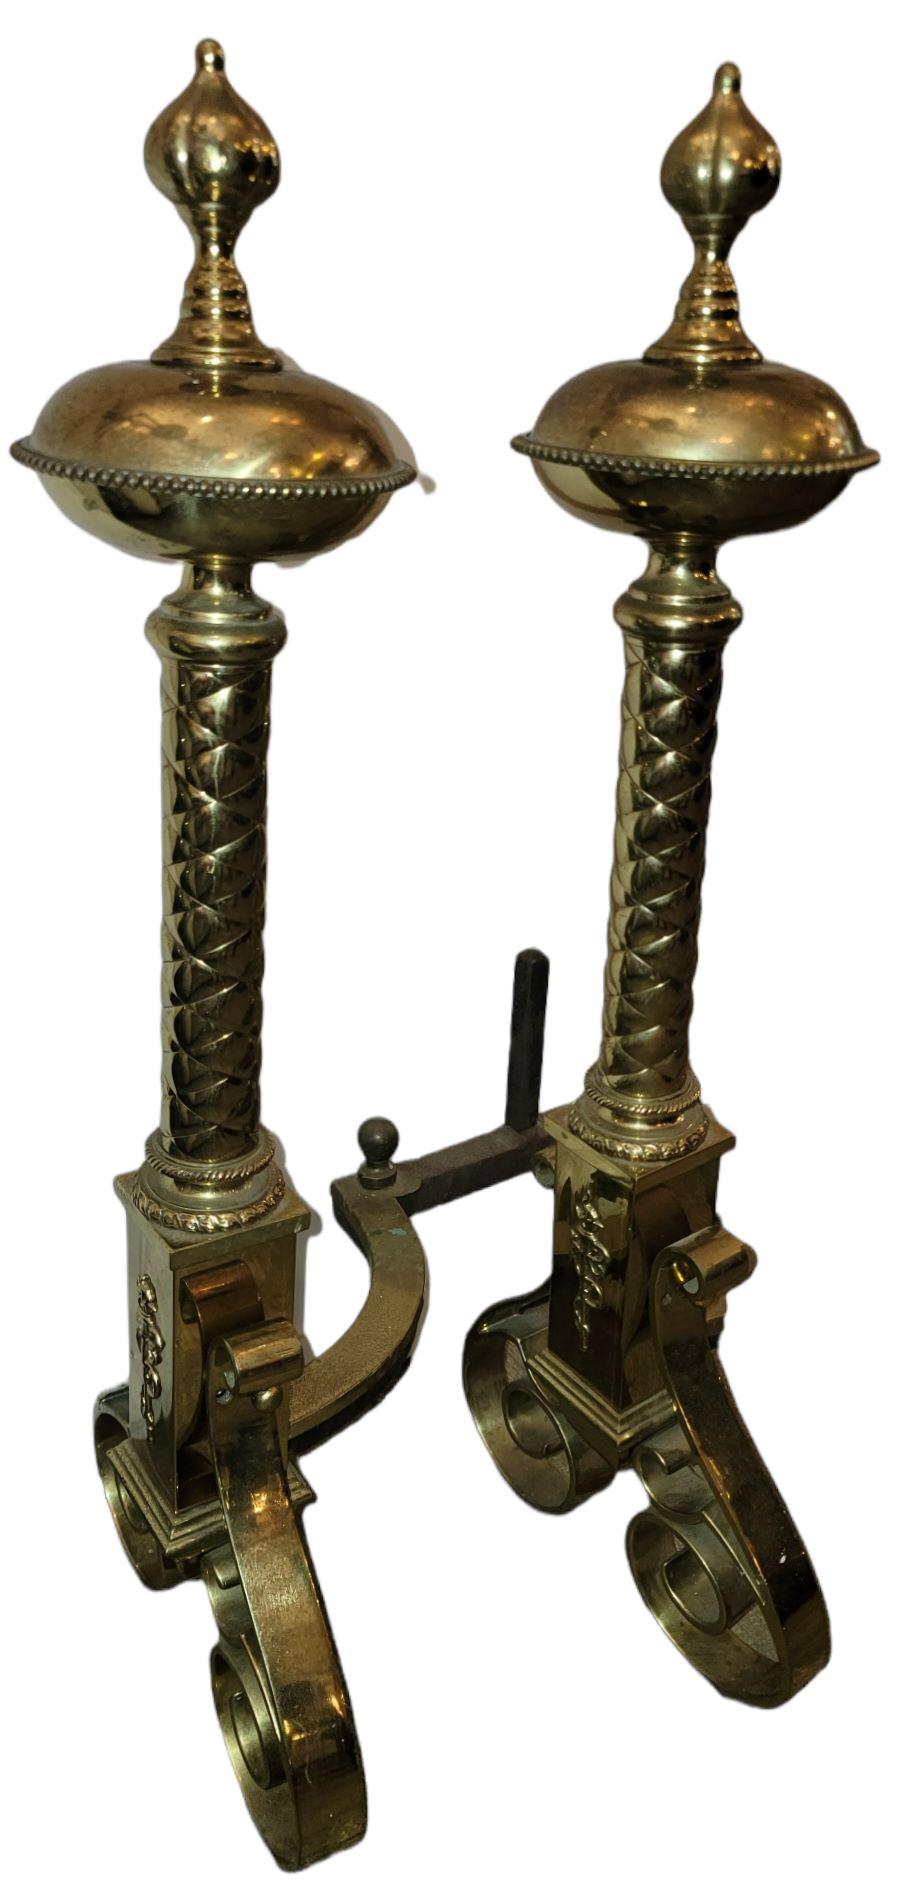 Early 20th Century Italian Fireplace Andiron and Chenet, 3 Piece Set In Good Condition For Sale In Pasadena, CA